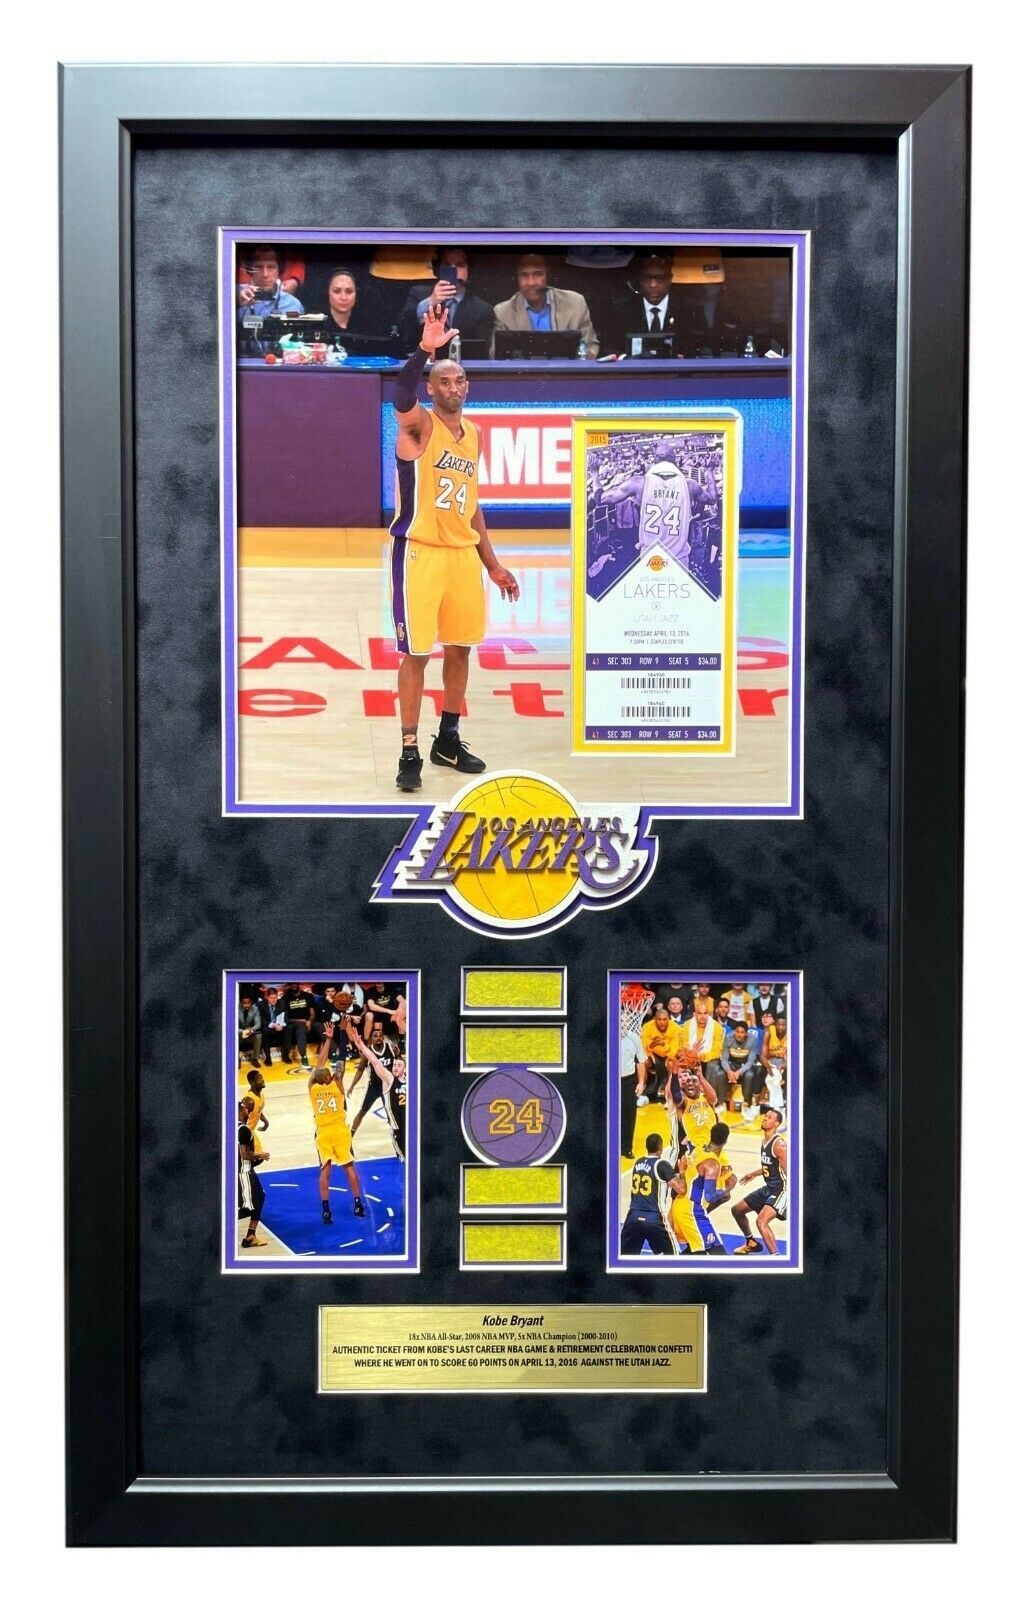 Primary image for Kobe Bryant Final Authentic Game Ticket vs. Jazz & Used Confetti Framed Lakers